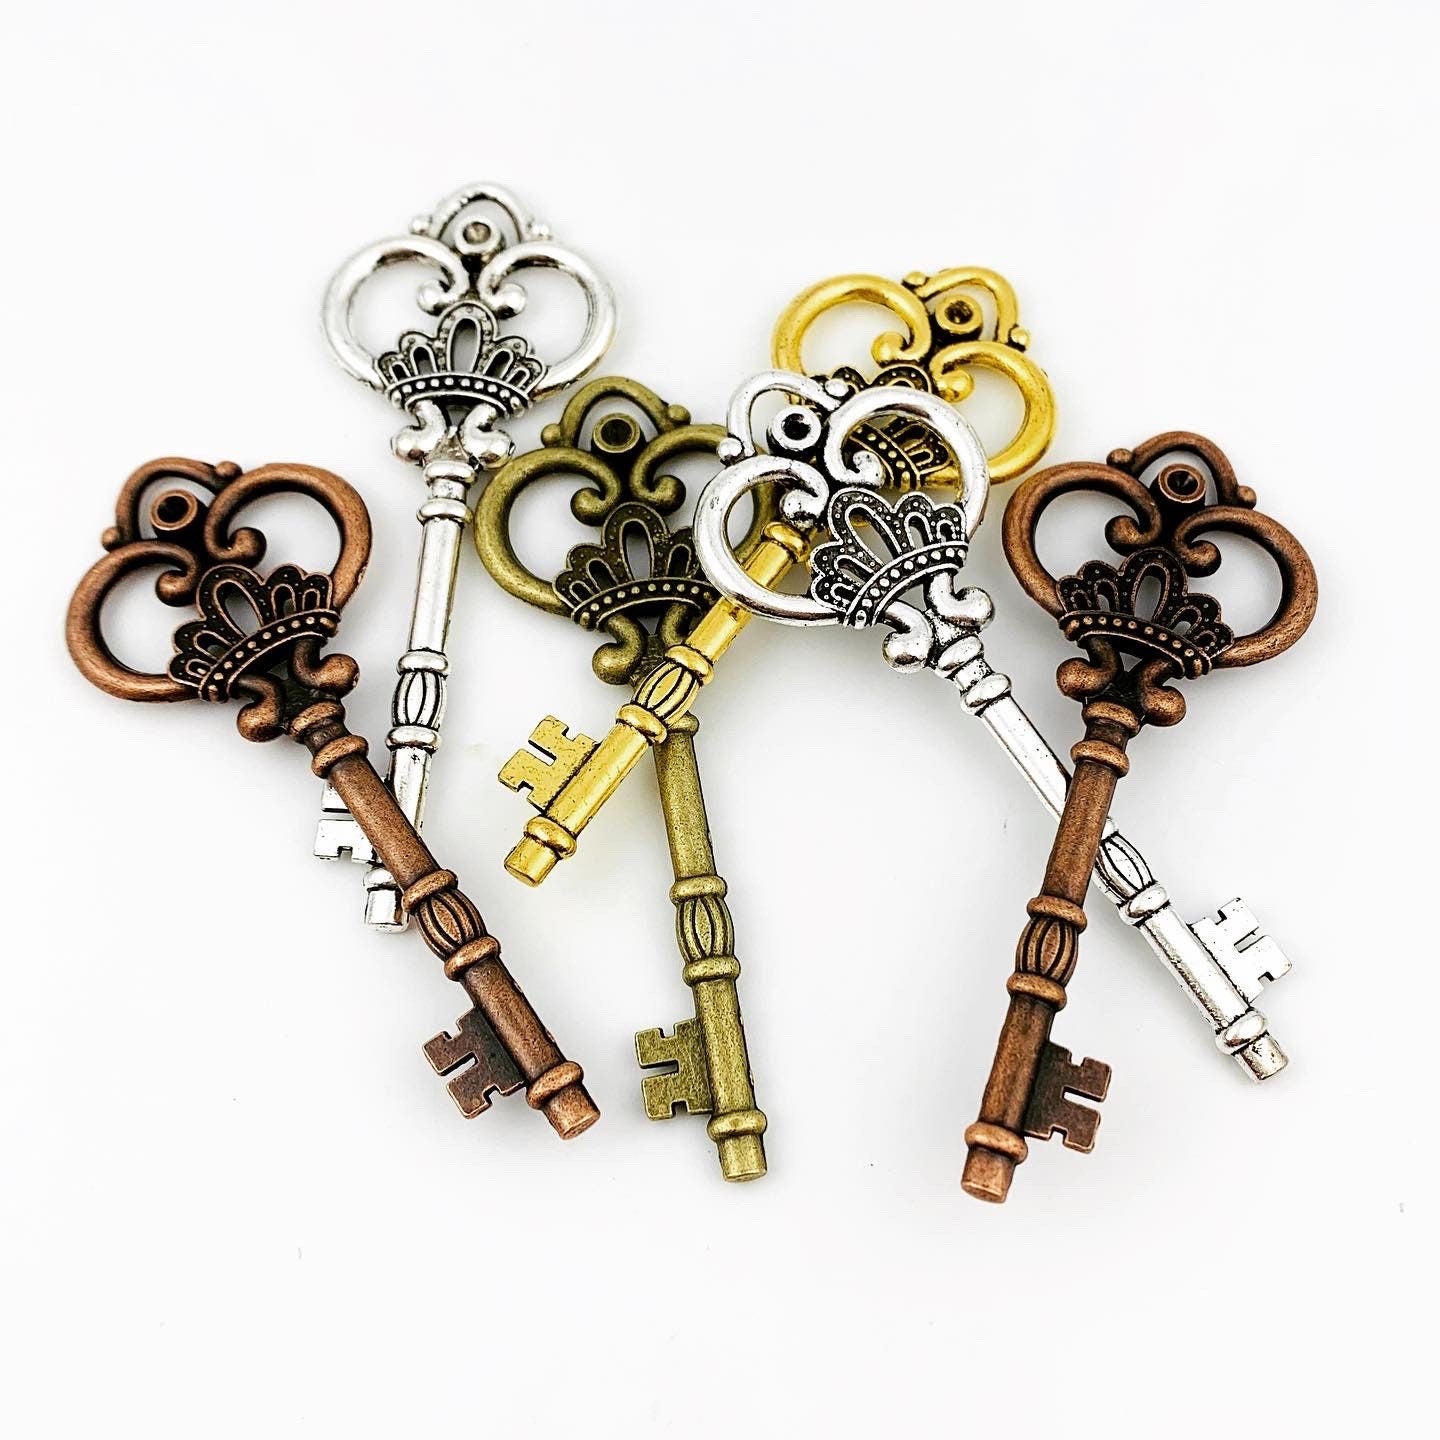 Large Key Pendants - Silver, Gold, Bronze, and Copper Finish - Vintage Style Key